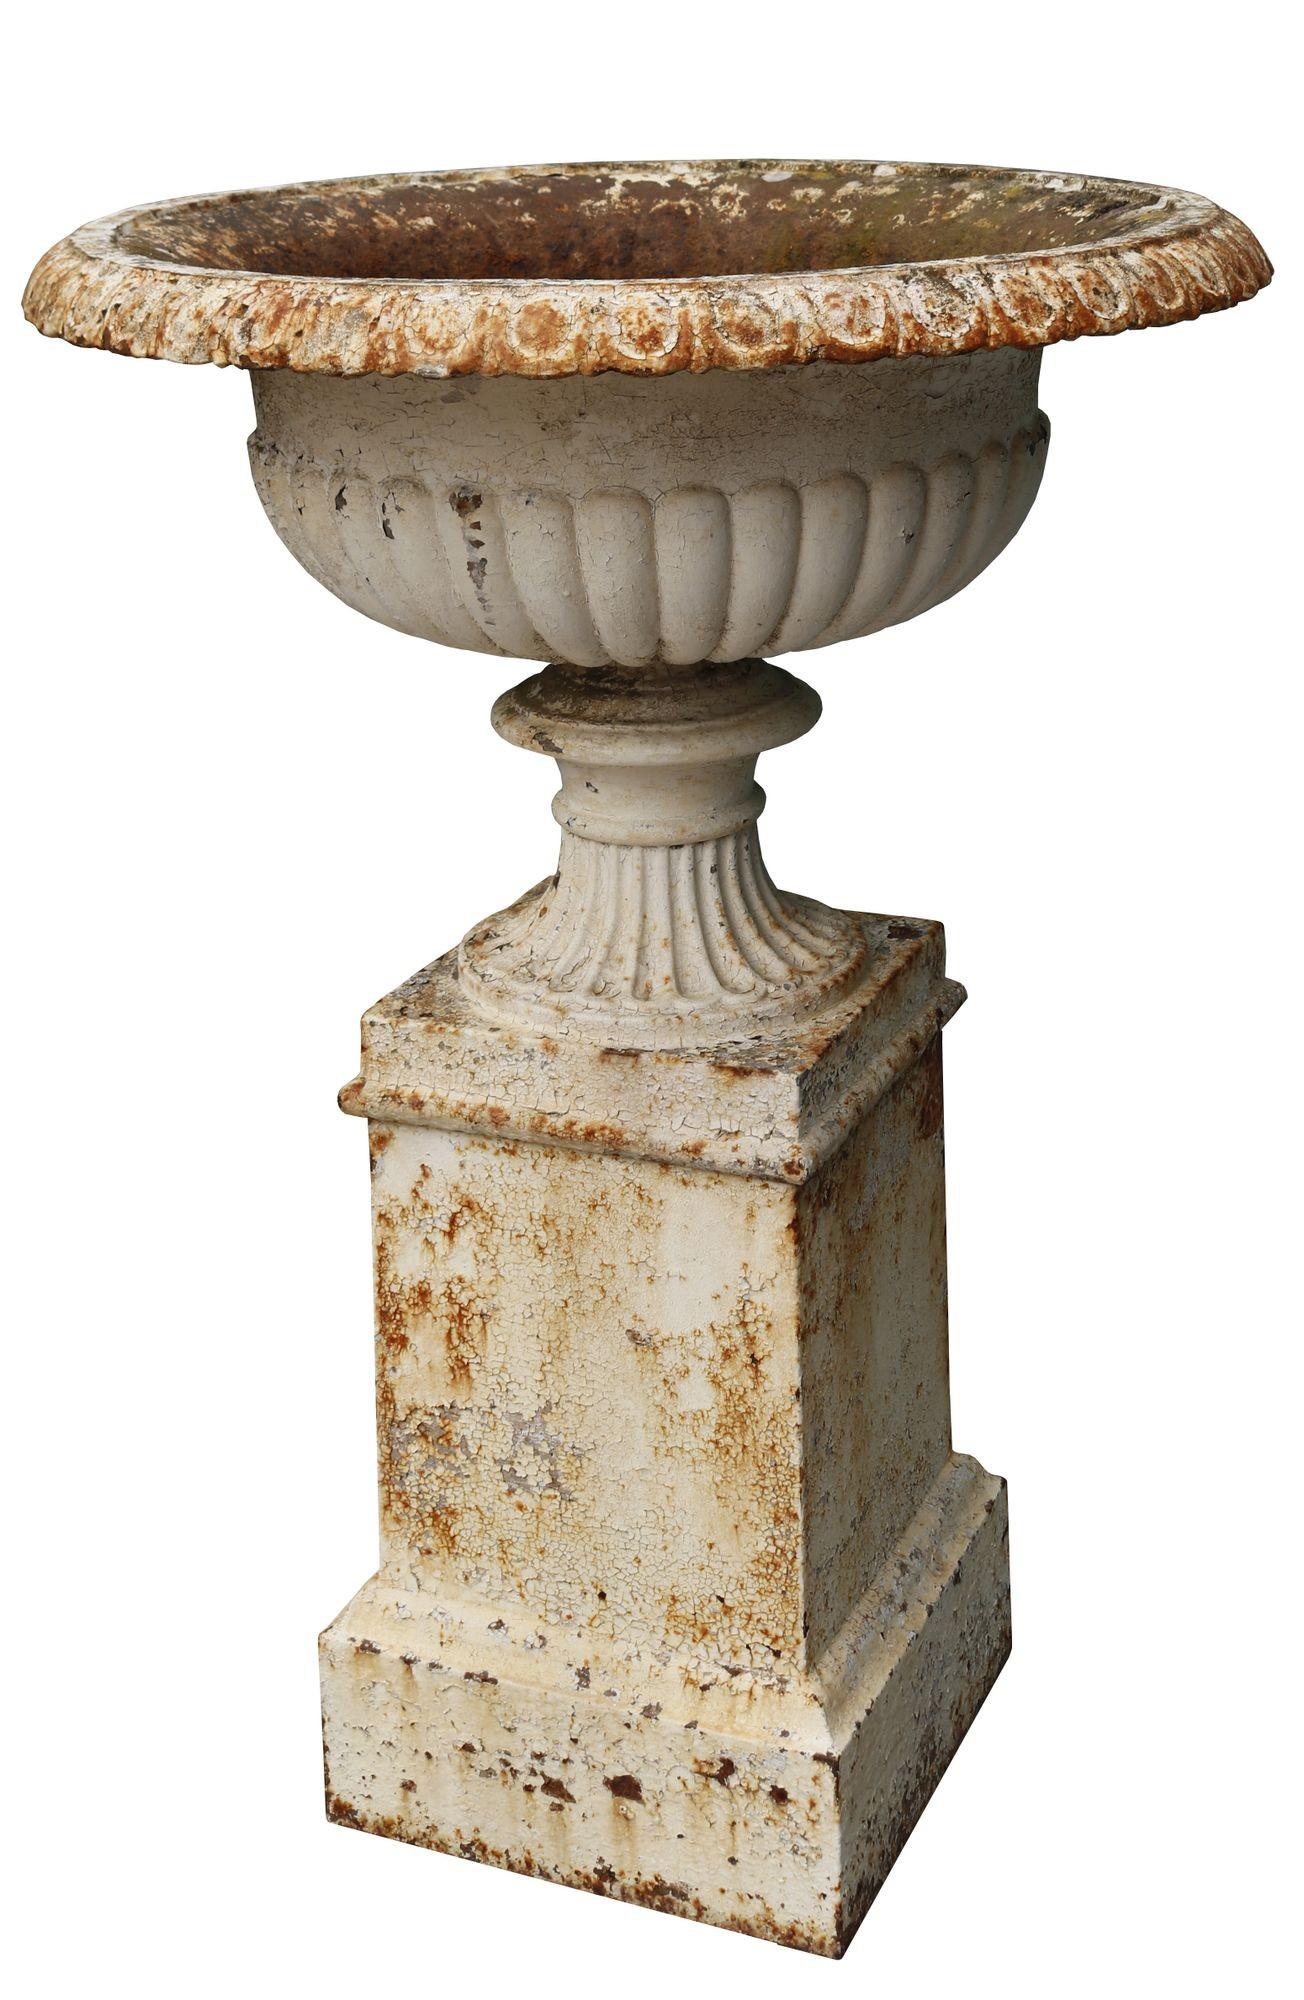 Antique Handyside cast iron tazza urn. A beautiful, shallow urn on an elegant pedestal. This would make a brilliant statement piece in any garden.
 
Additional Dimensions
Base
38.5 cm x 38.5 cm.